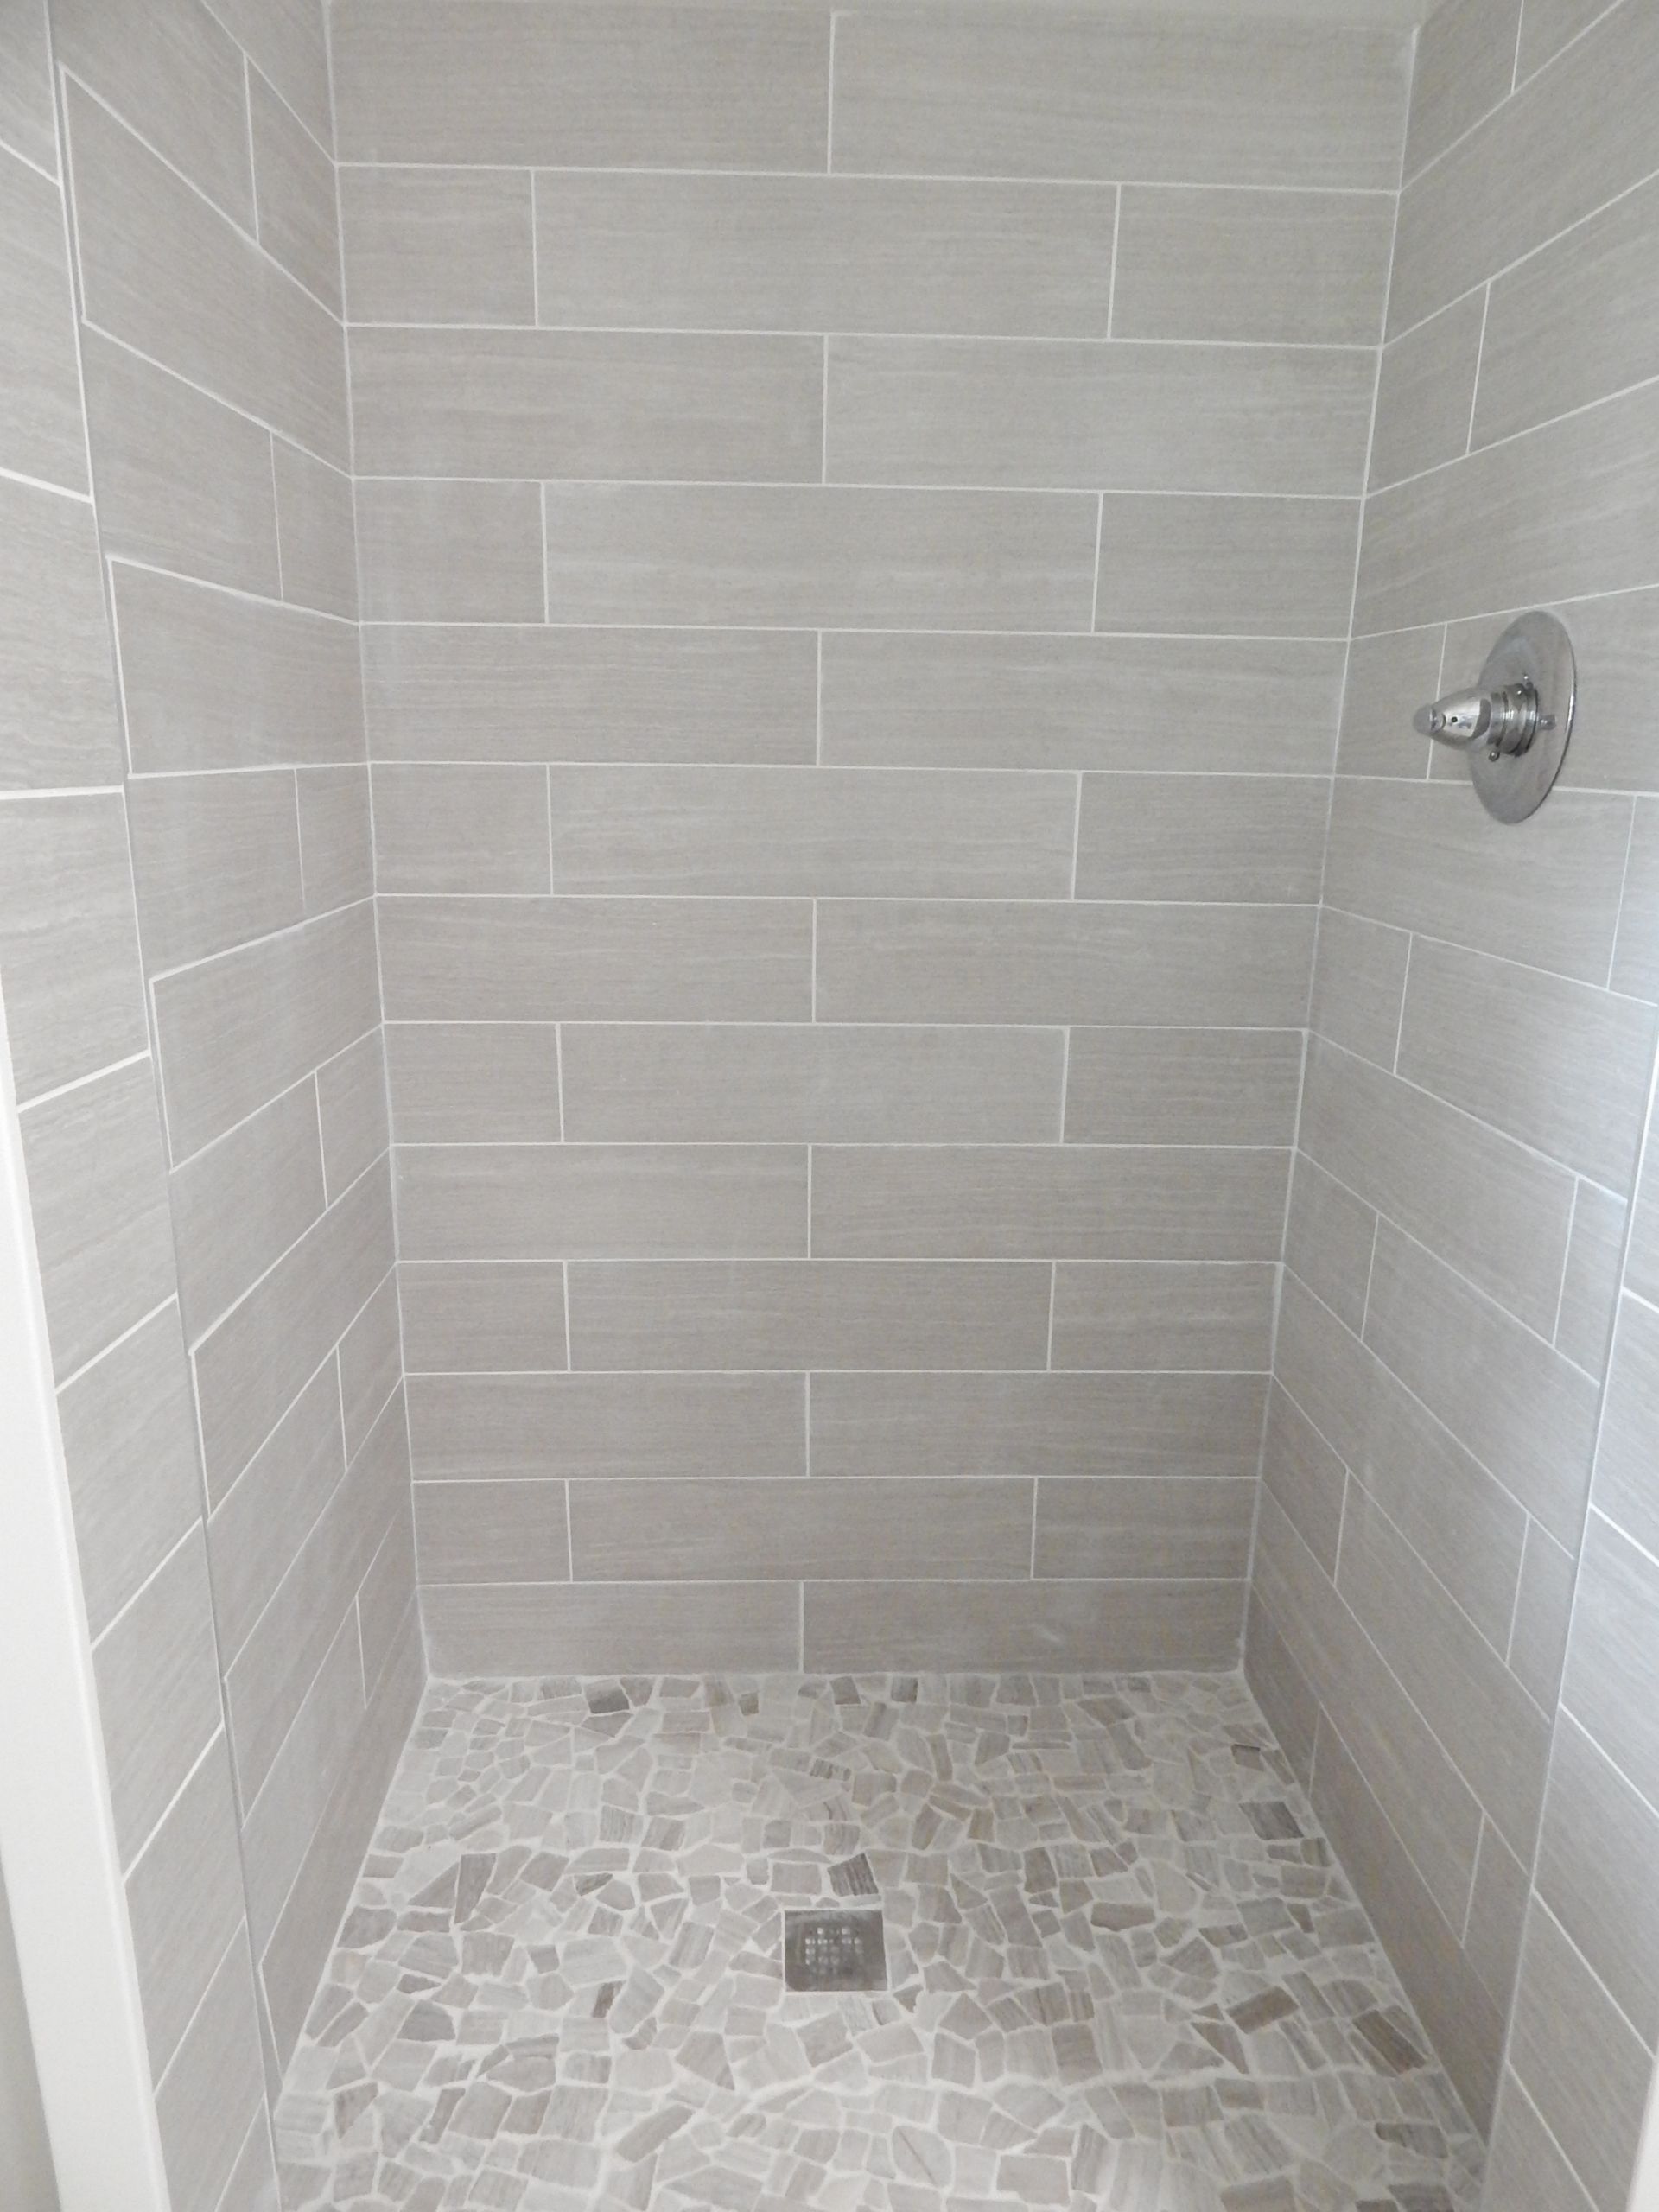 Lowes Bathroom Tile
 Bathroom Give Your Shower Some Character With New Lowes